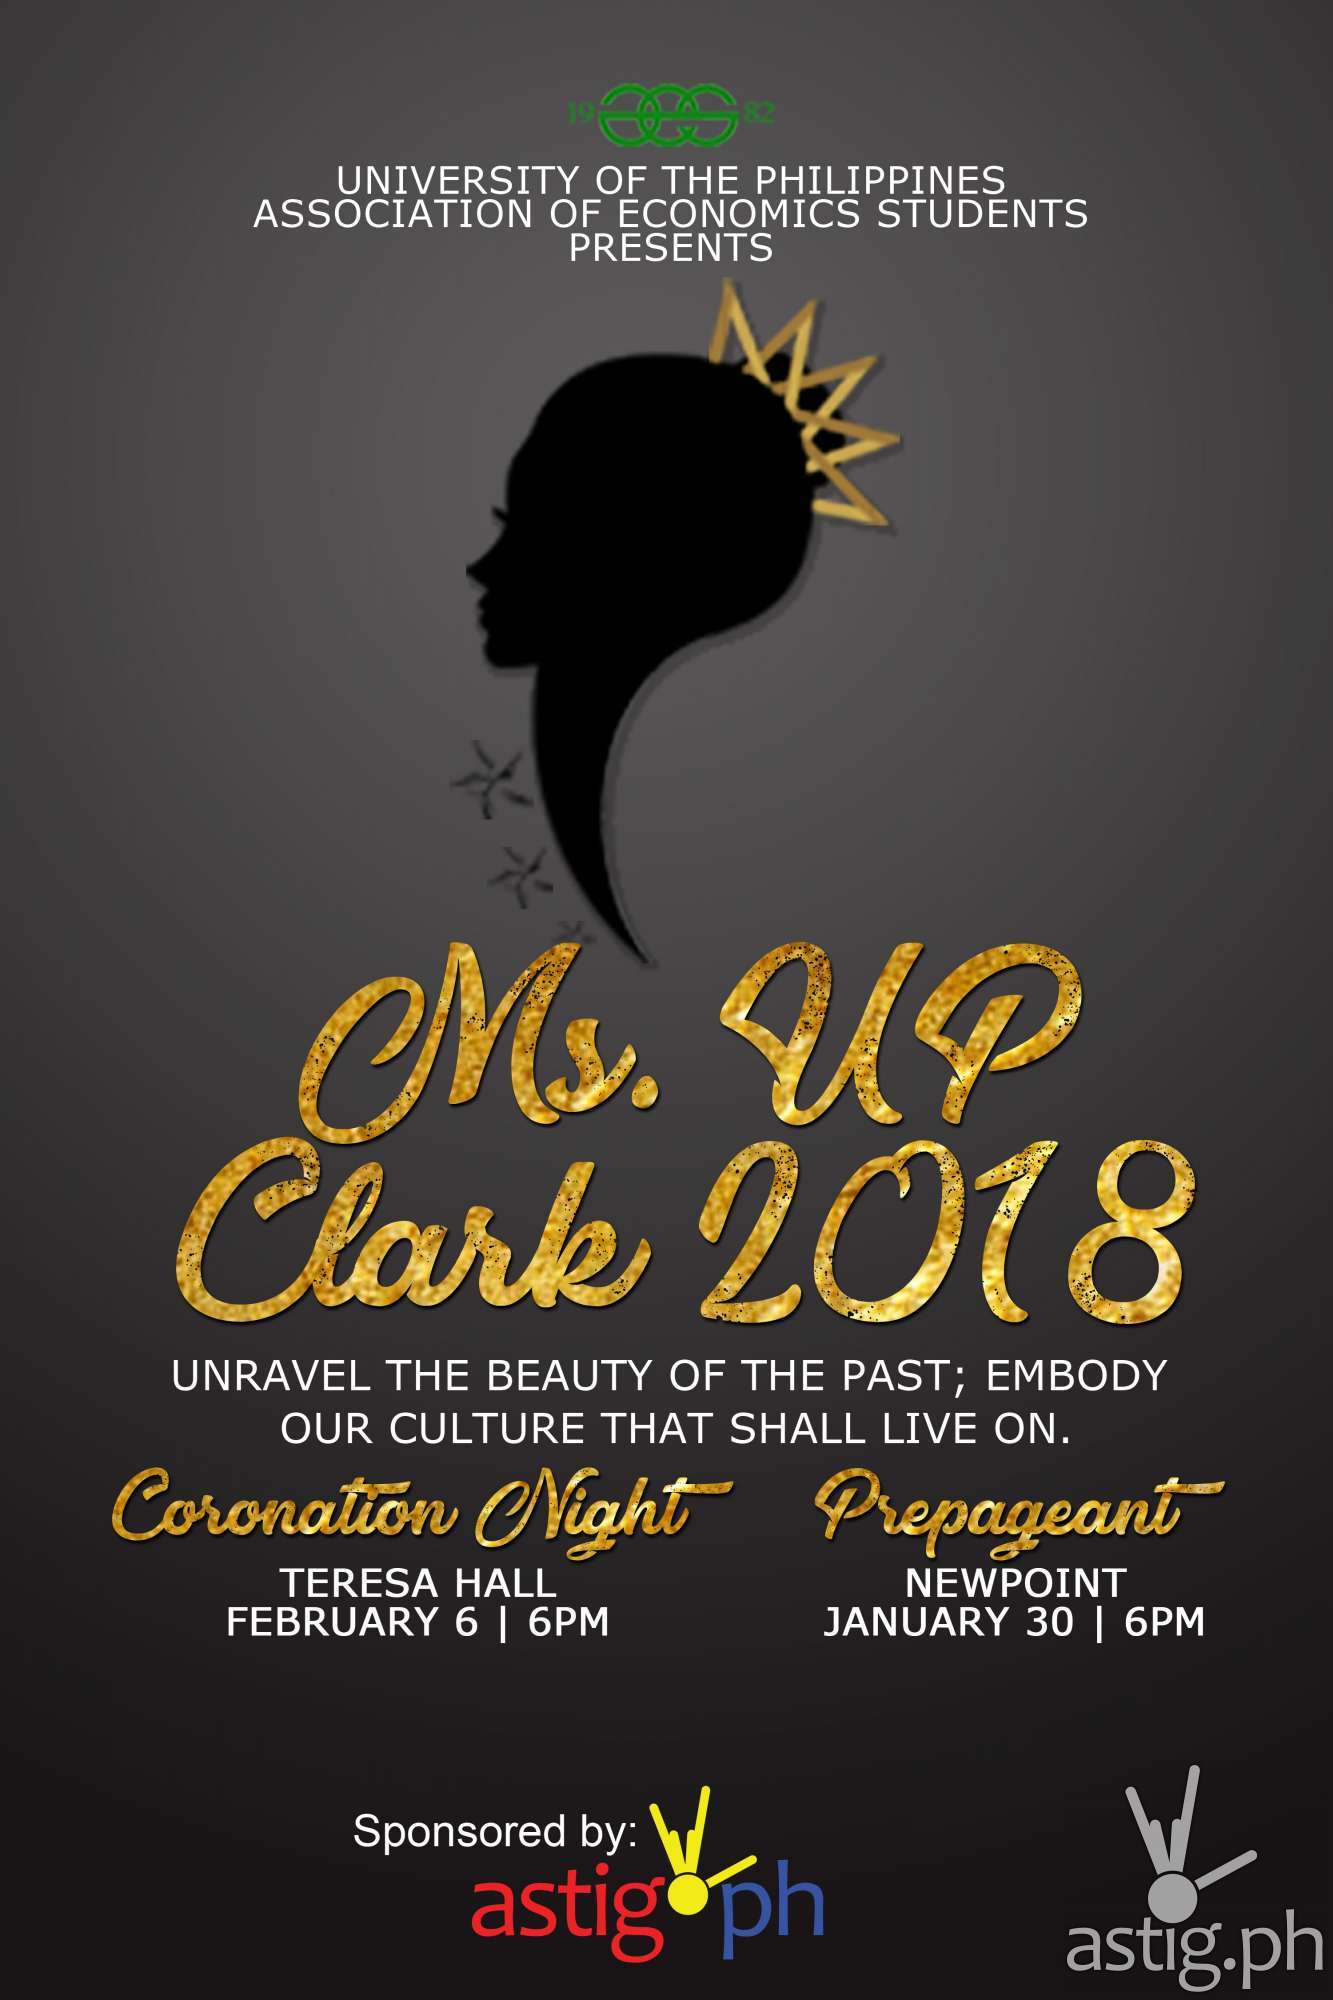 Ms UP Clark poster